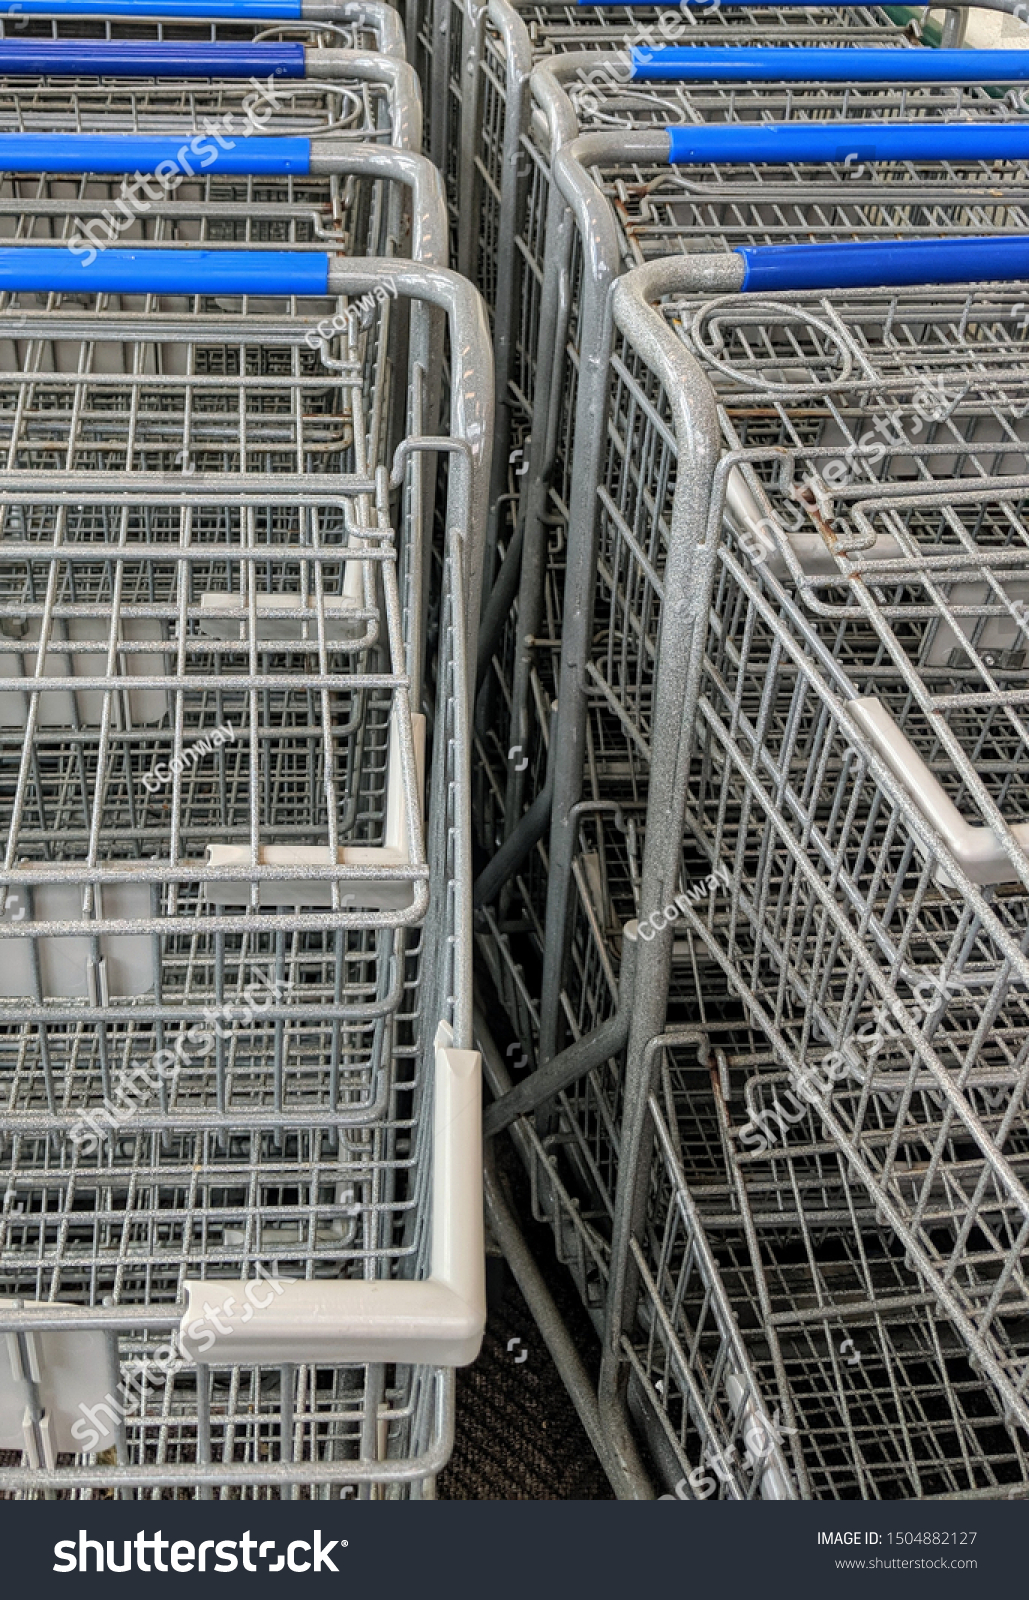 Row of metal grocery carts #1504882127